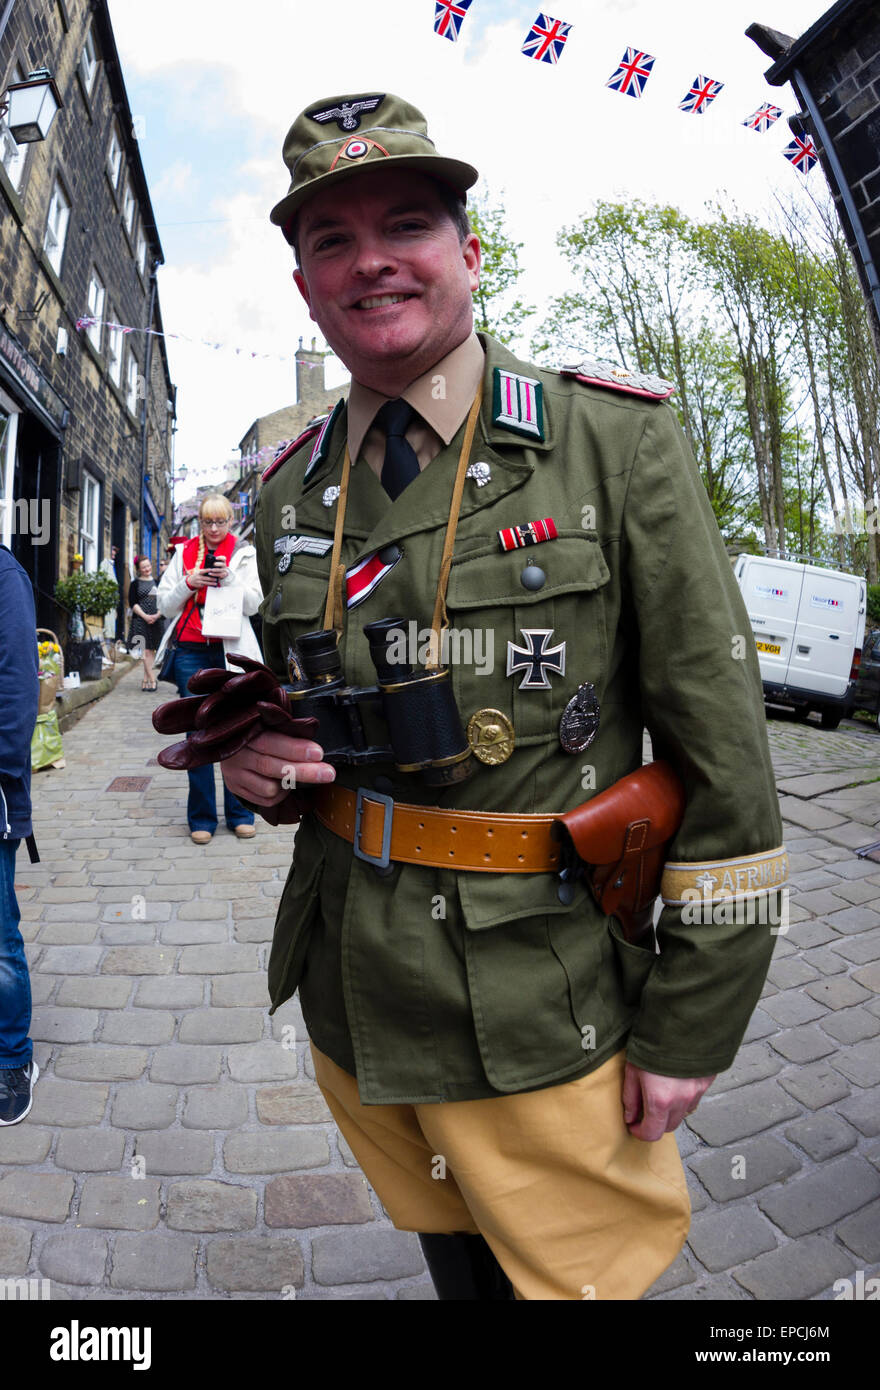 Haworth, West Yorkshire, UK. 16th May, 2015. A man dressed in German Army uniforms at Haworth 1940s weekend, an annual event in which people dress in period costume and visit the village of Haworth to relive the 1940s. After complaints in previous years, the organisers have requested that people don't wear German Uniforms. Credit:  West Yorkshire Images/Alamy Live News Stock Photo